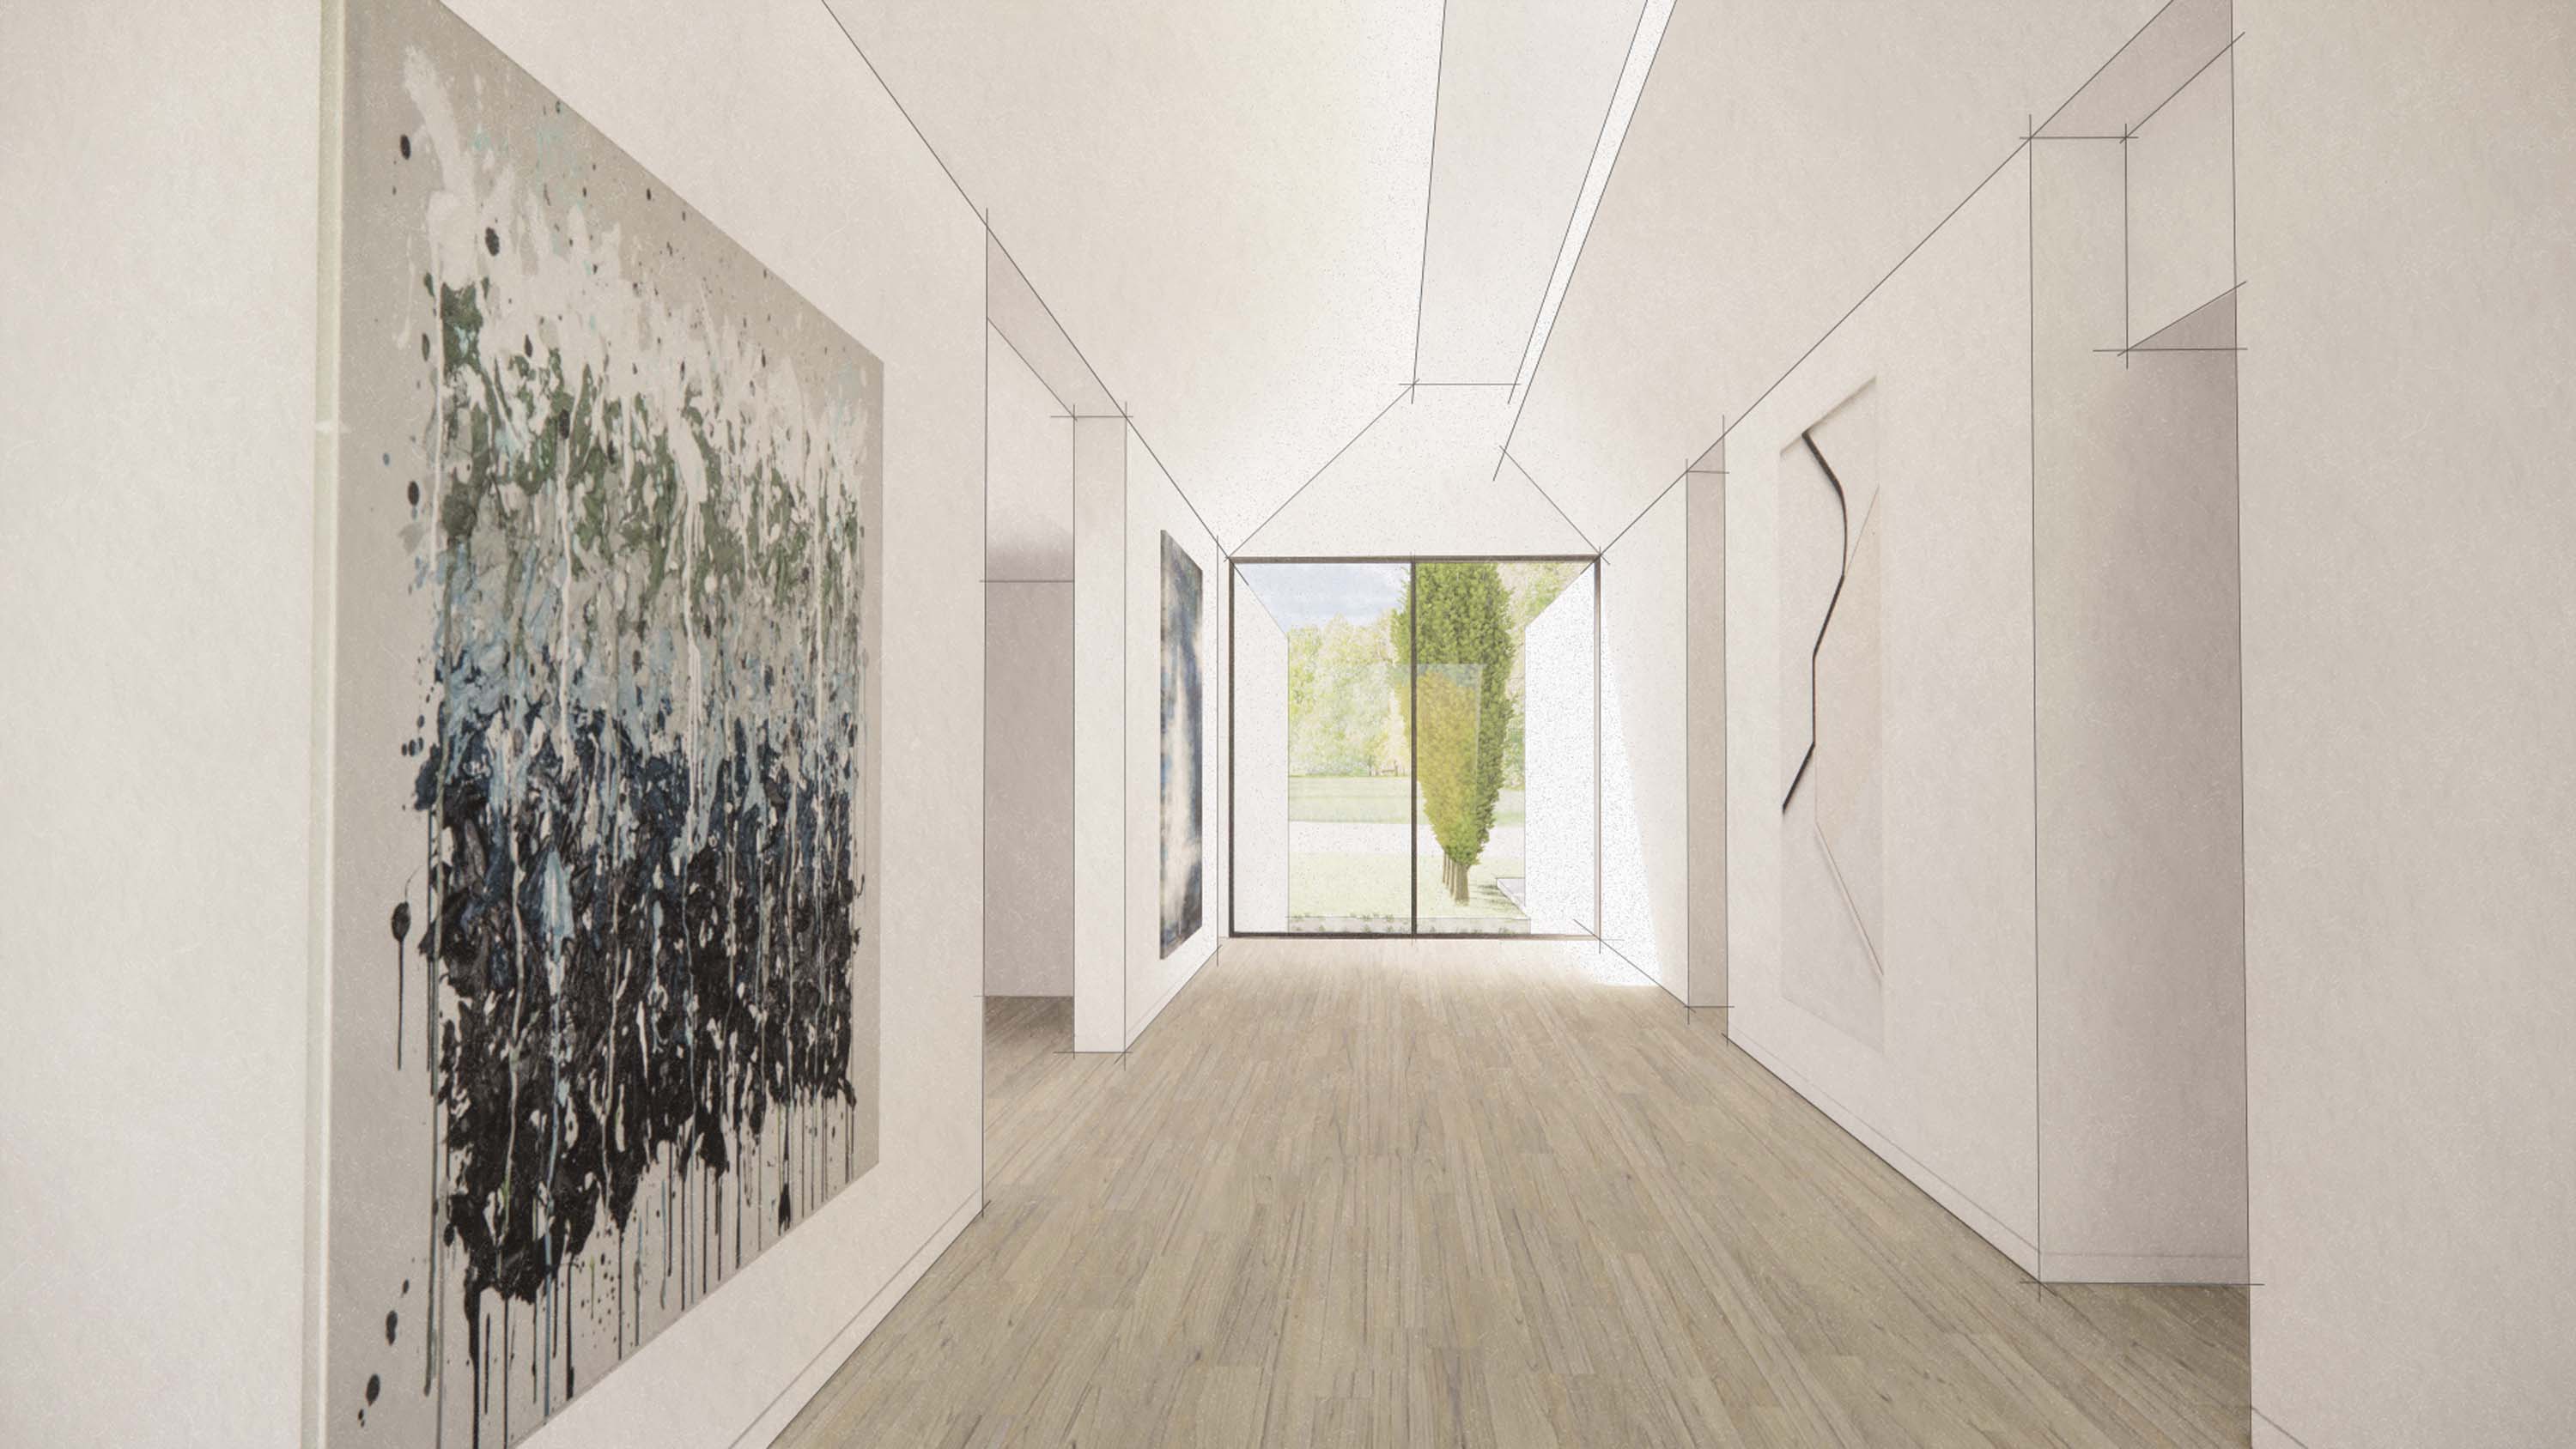 Interior rendering of Specht Novak Architect's Meridian House showcasing the clerestory windows to diffuse light onto the art and white surfaces.